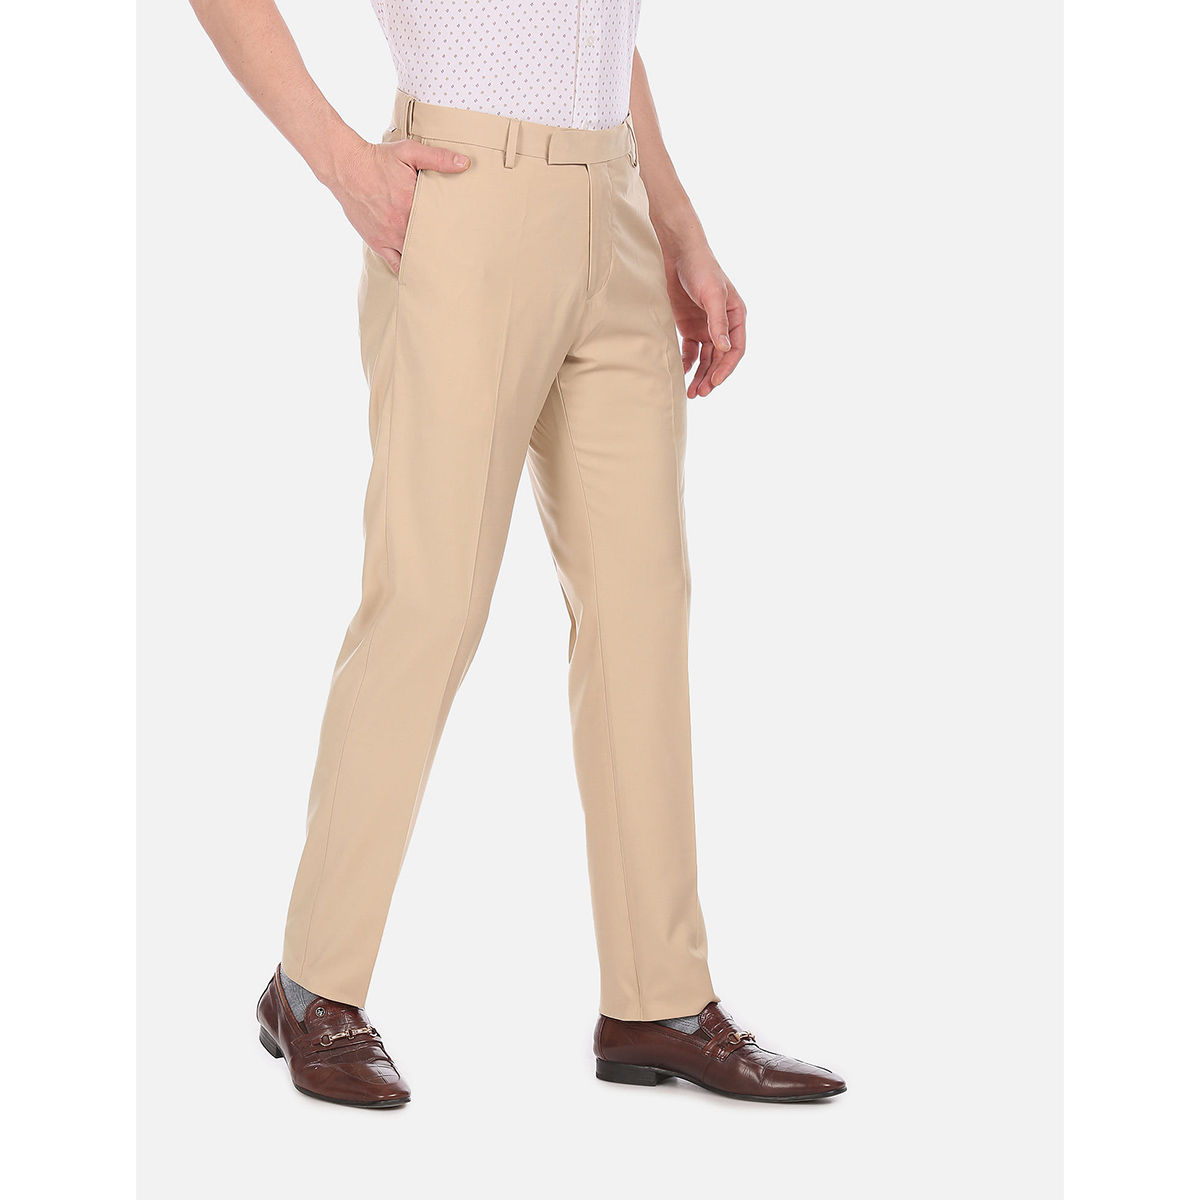 Us polo assn slim fit trousers  Buy Us polo assn slim fit trousers  online in India